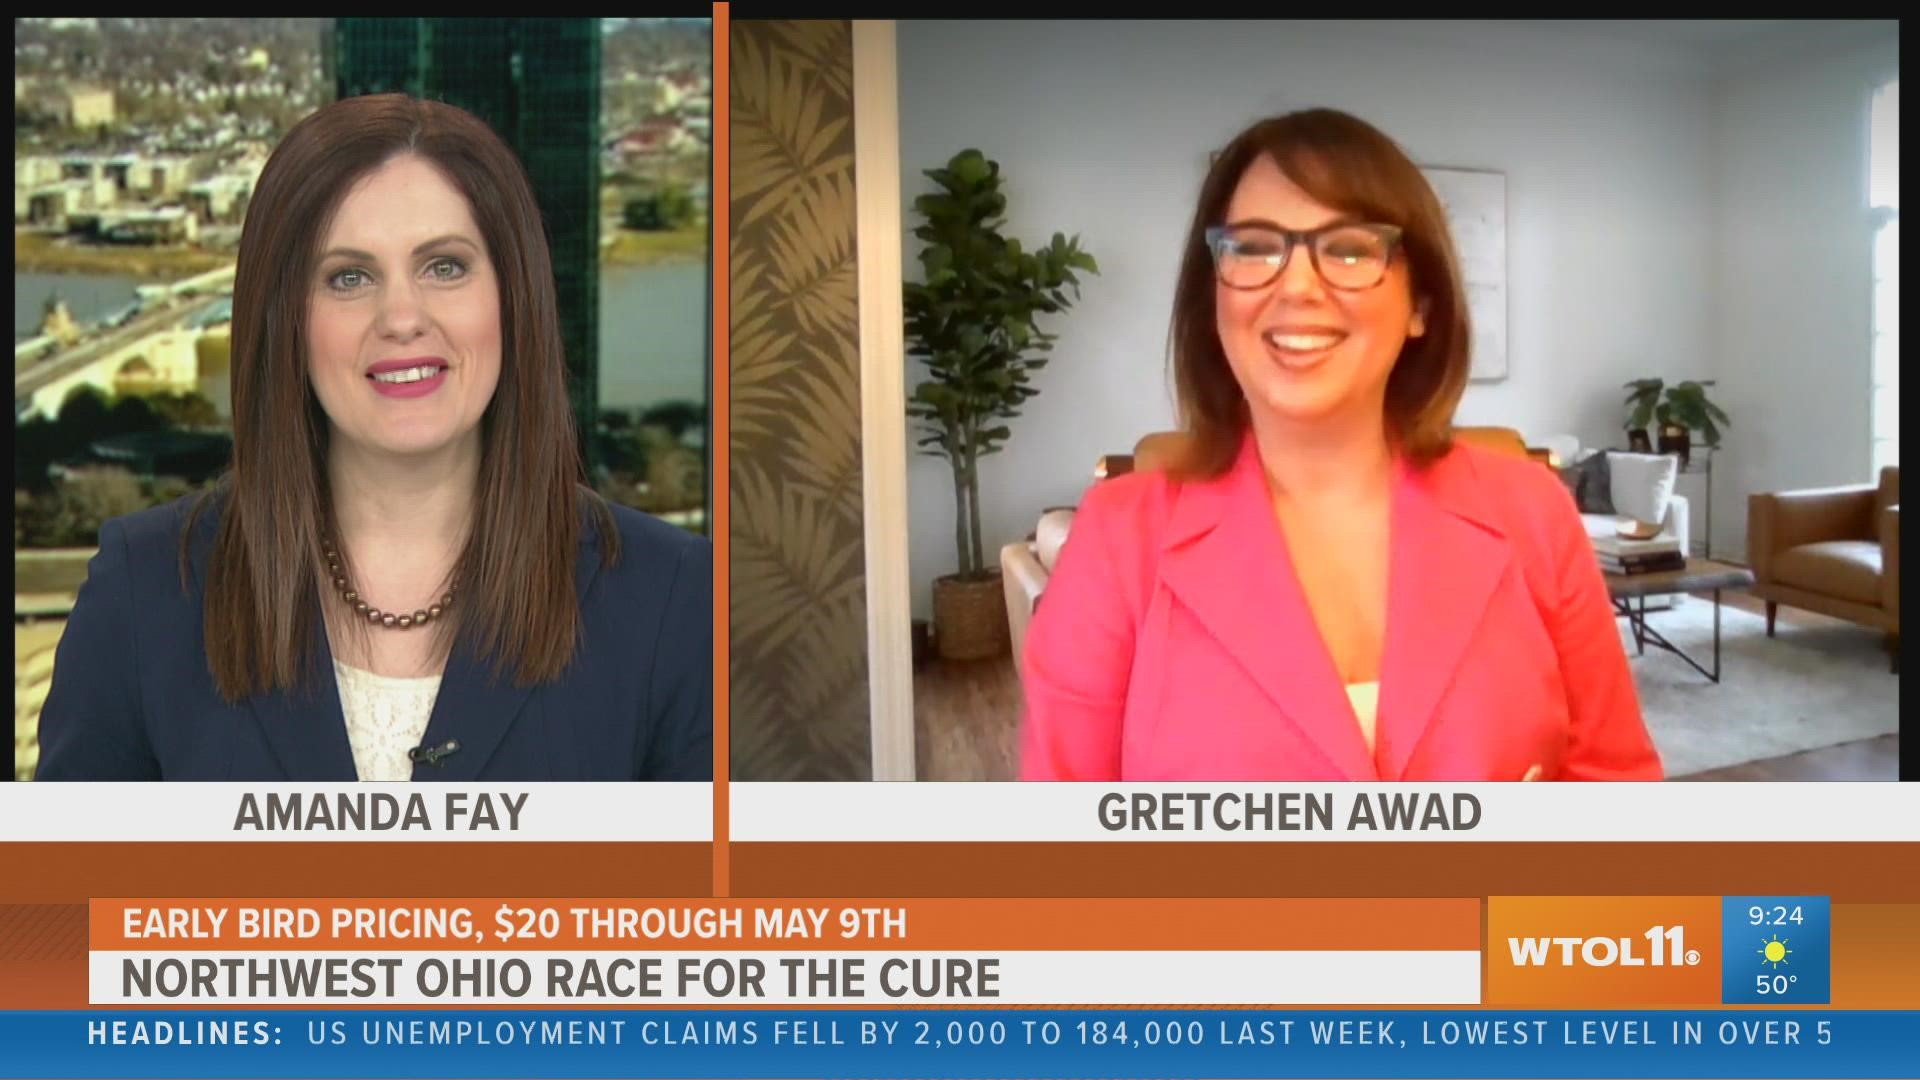 Executive Director of Susan G. Komen Northwest Ohio Gretchen Awad joins Your Day with more on the 2022 Northwest Ohio Race for the Cure.